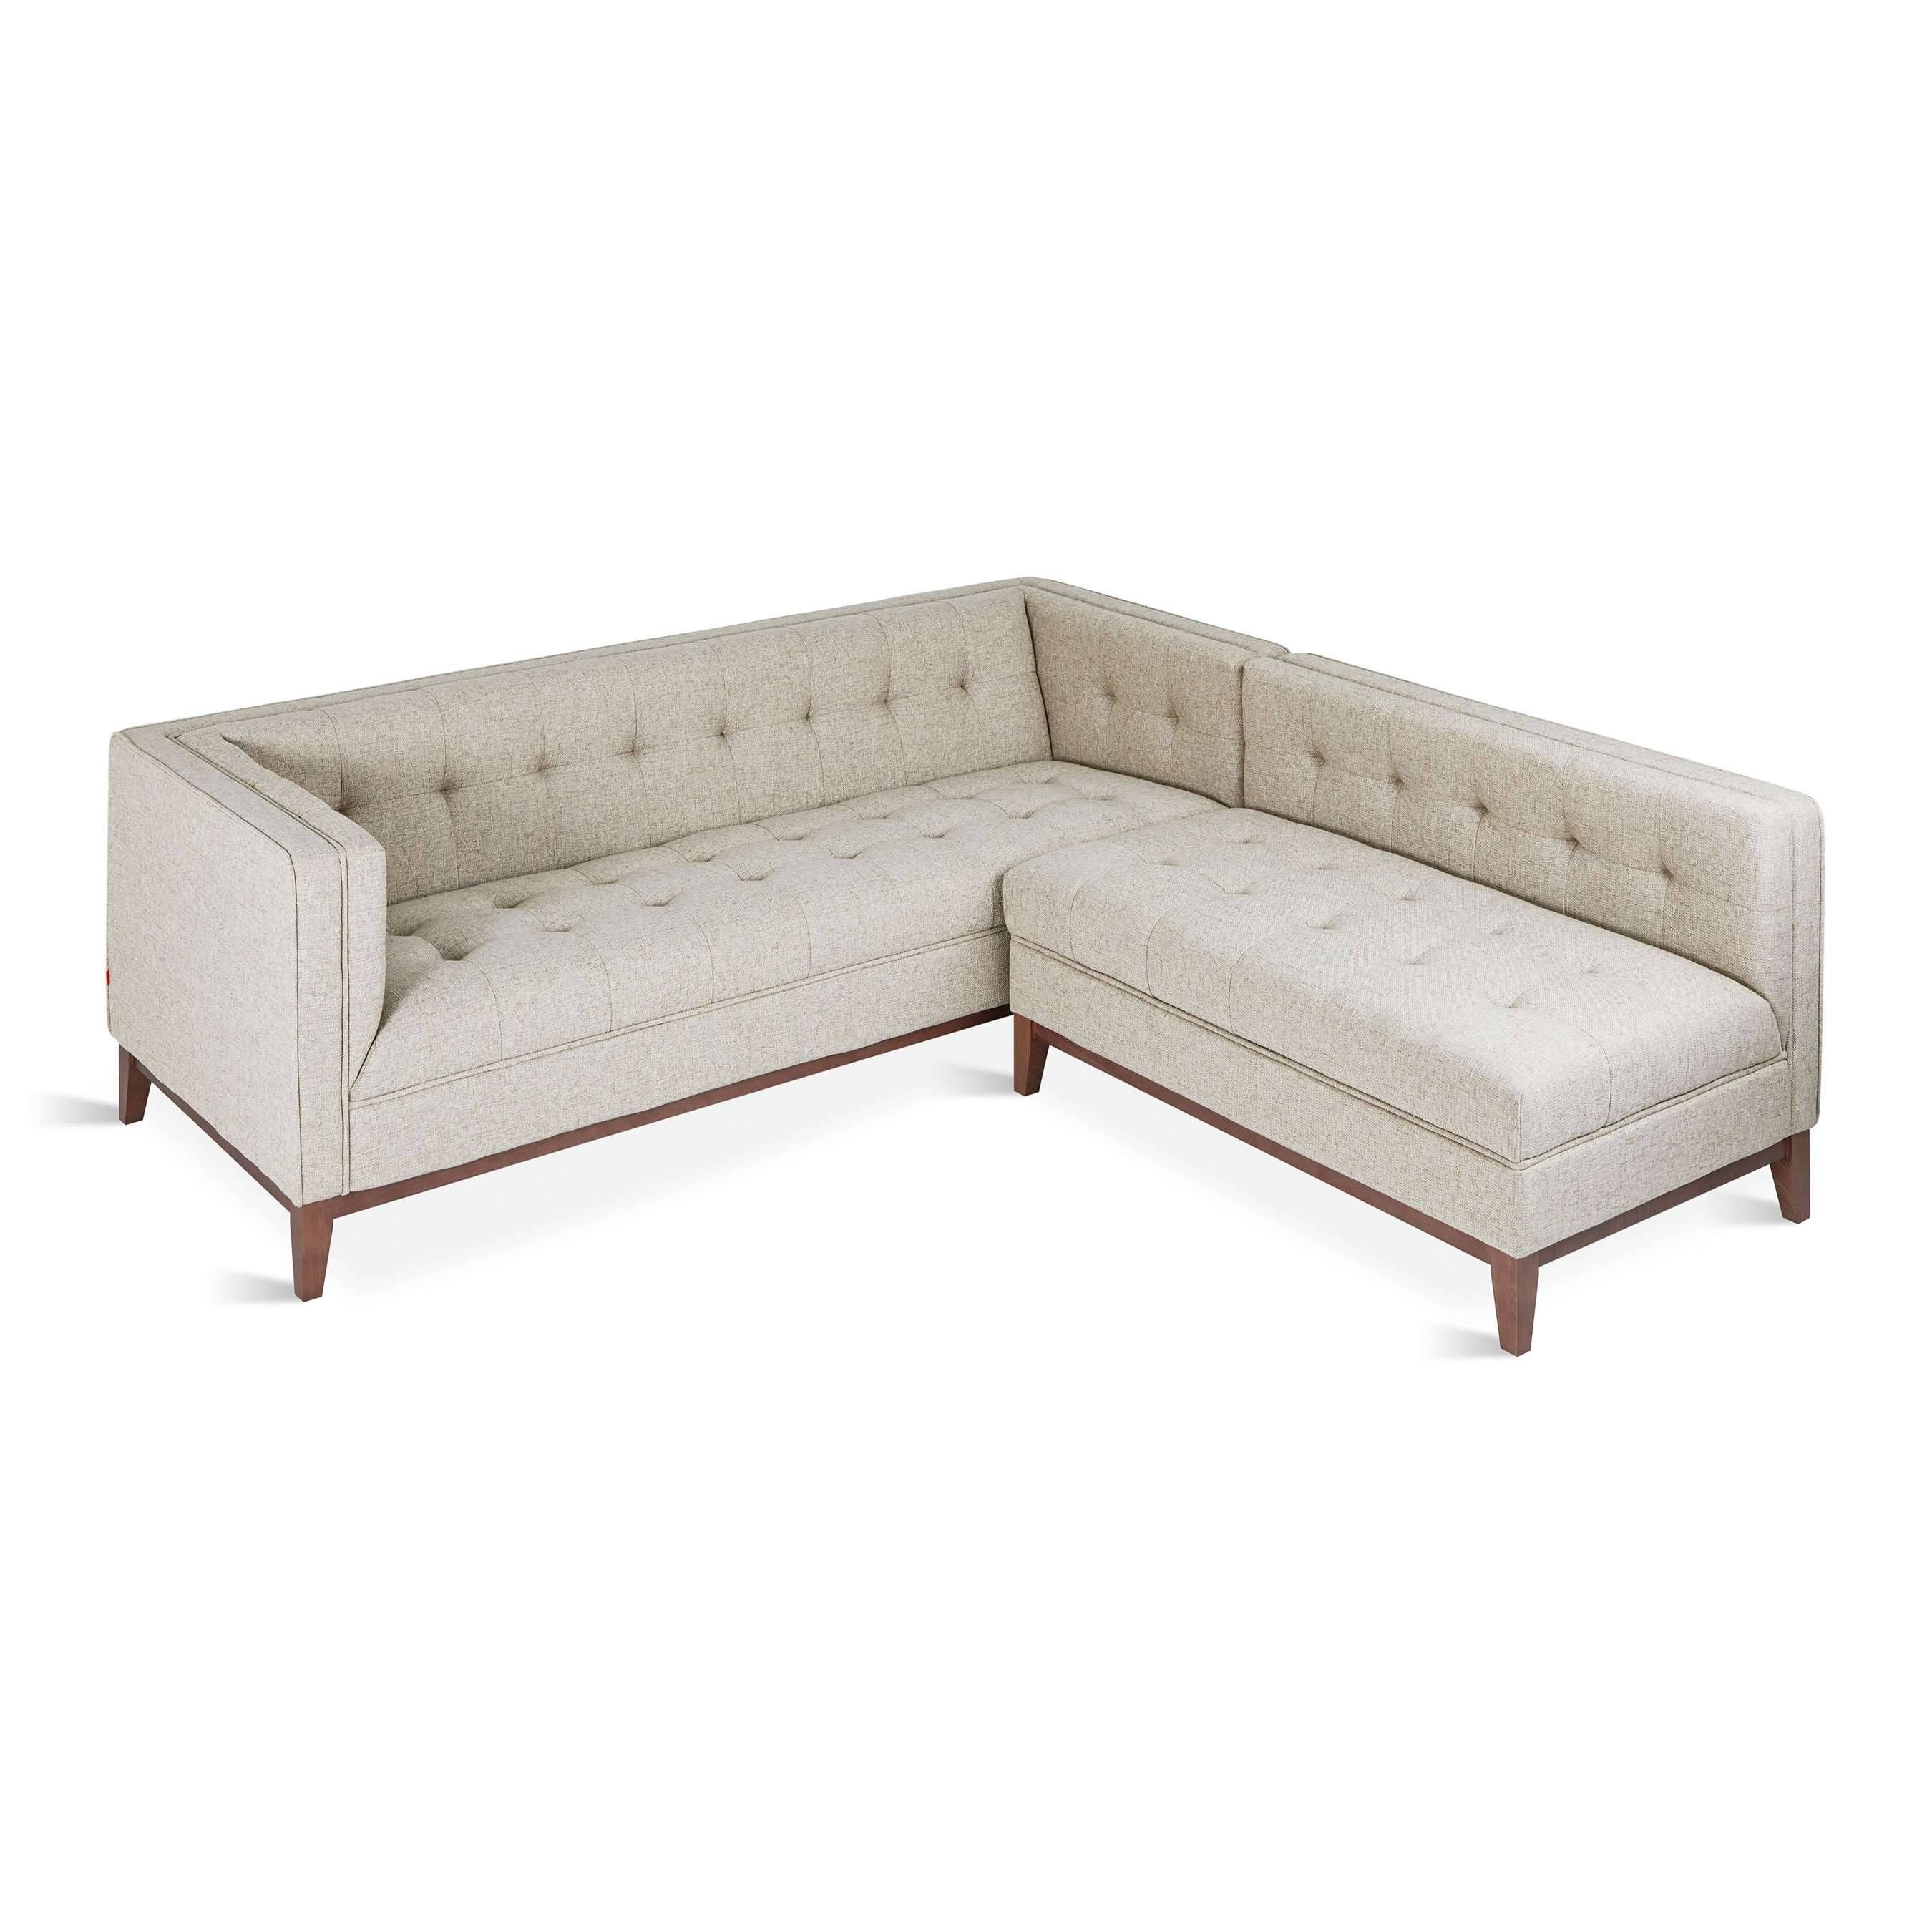 Atwood Bi Sectionalgus* Modern | Yliving Inside Bisectional Sofa (View 25 of 30)